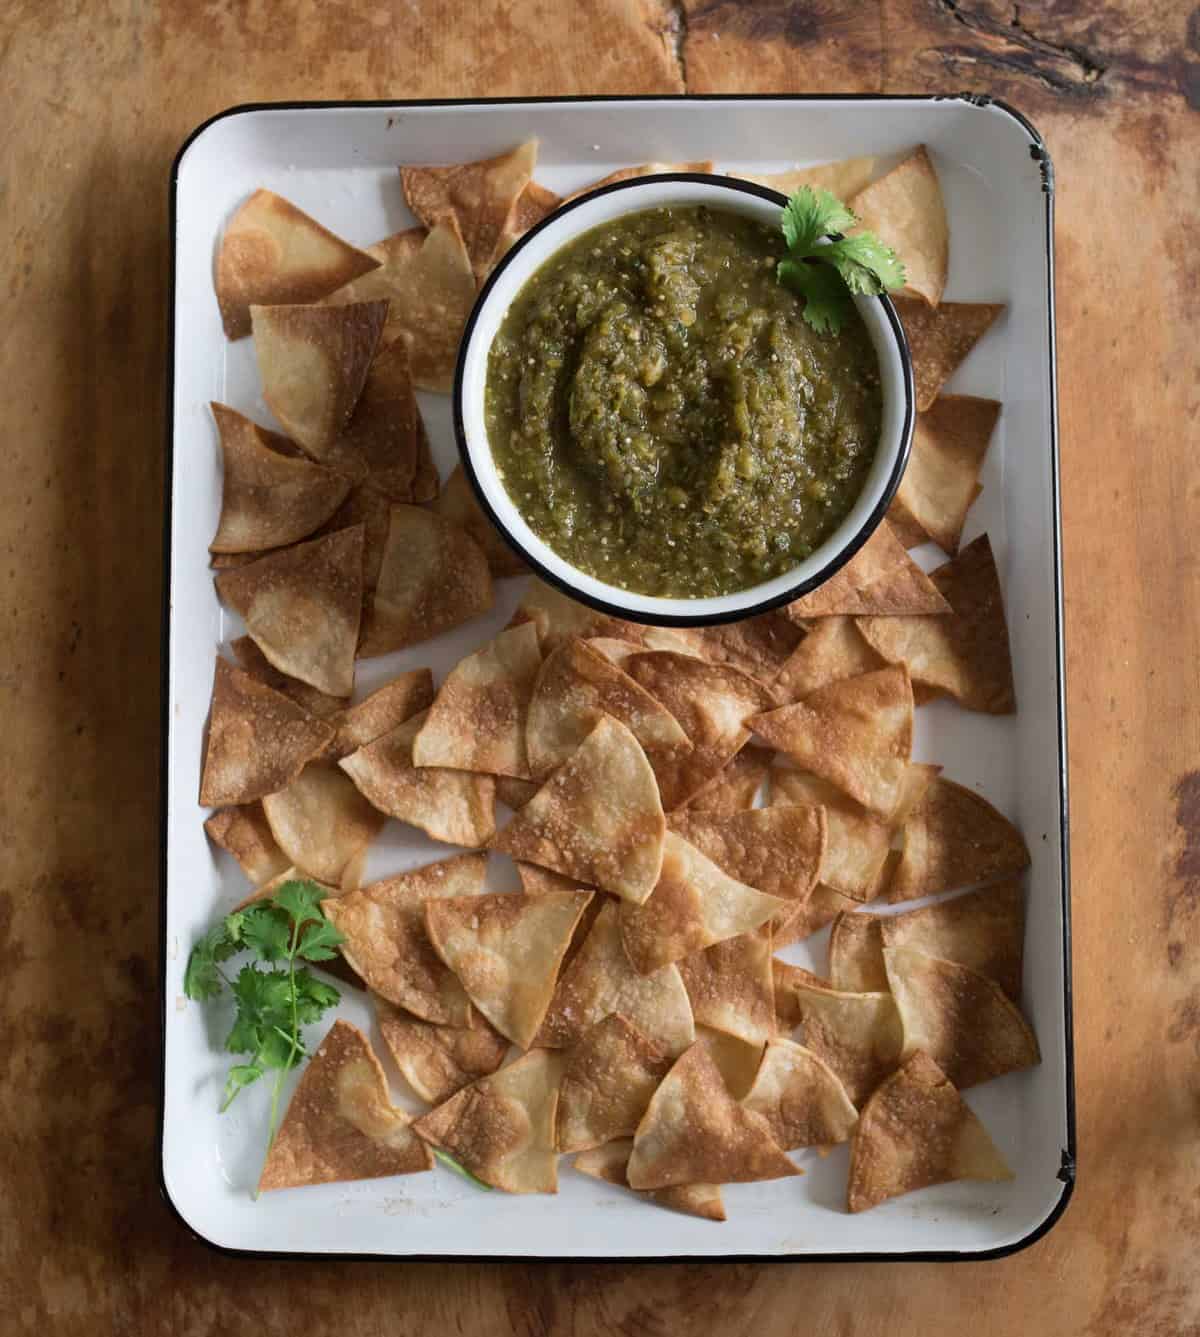 Quick and easy salsa verde recipe made with oven roasted tomatillos, peppers, onion, and garlic all blended to salsa perfection with a mix of herbs, spices, and lime juice.